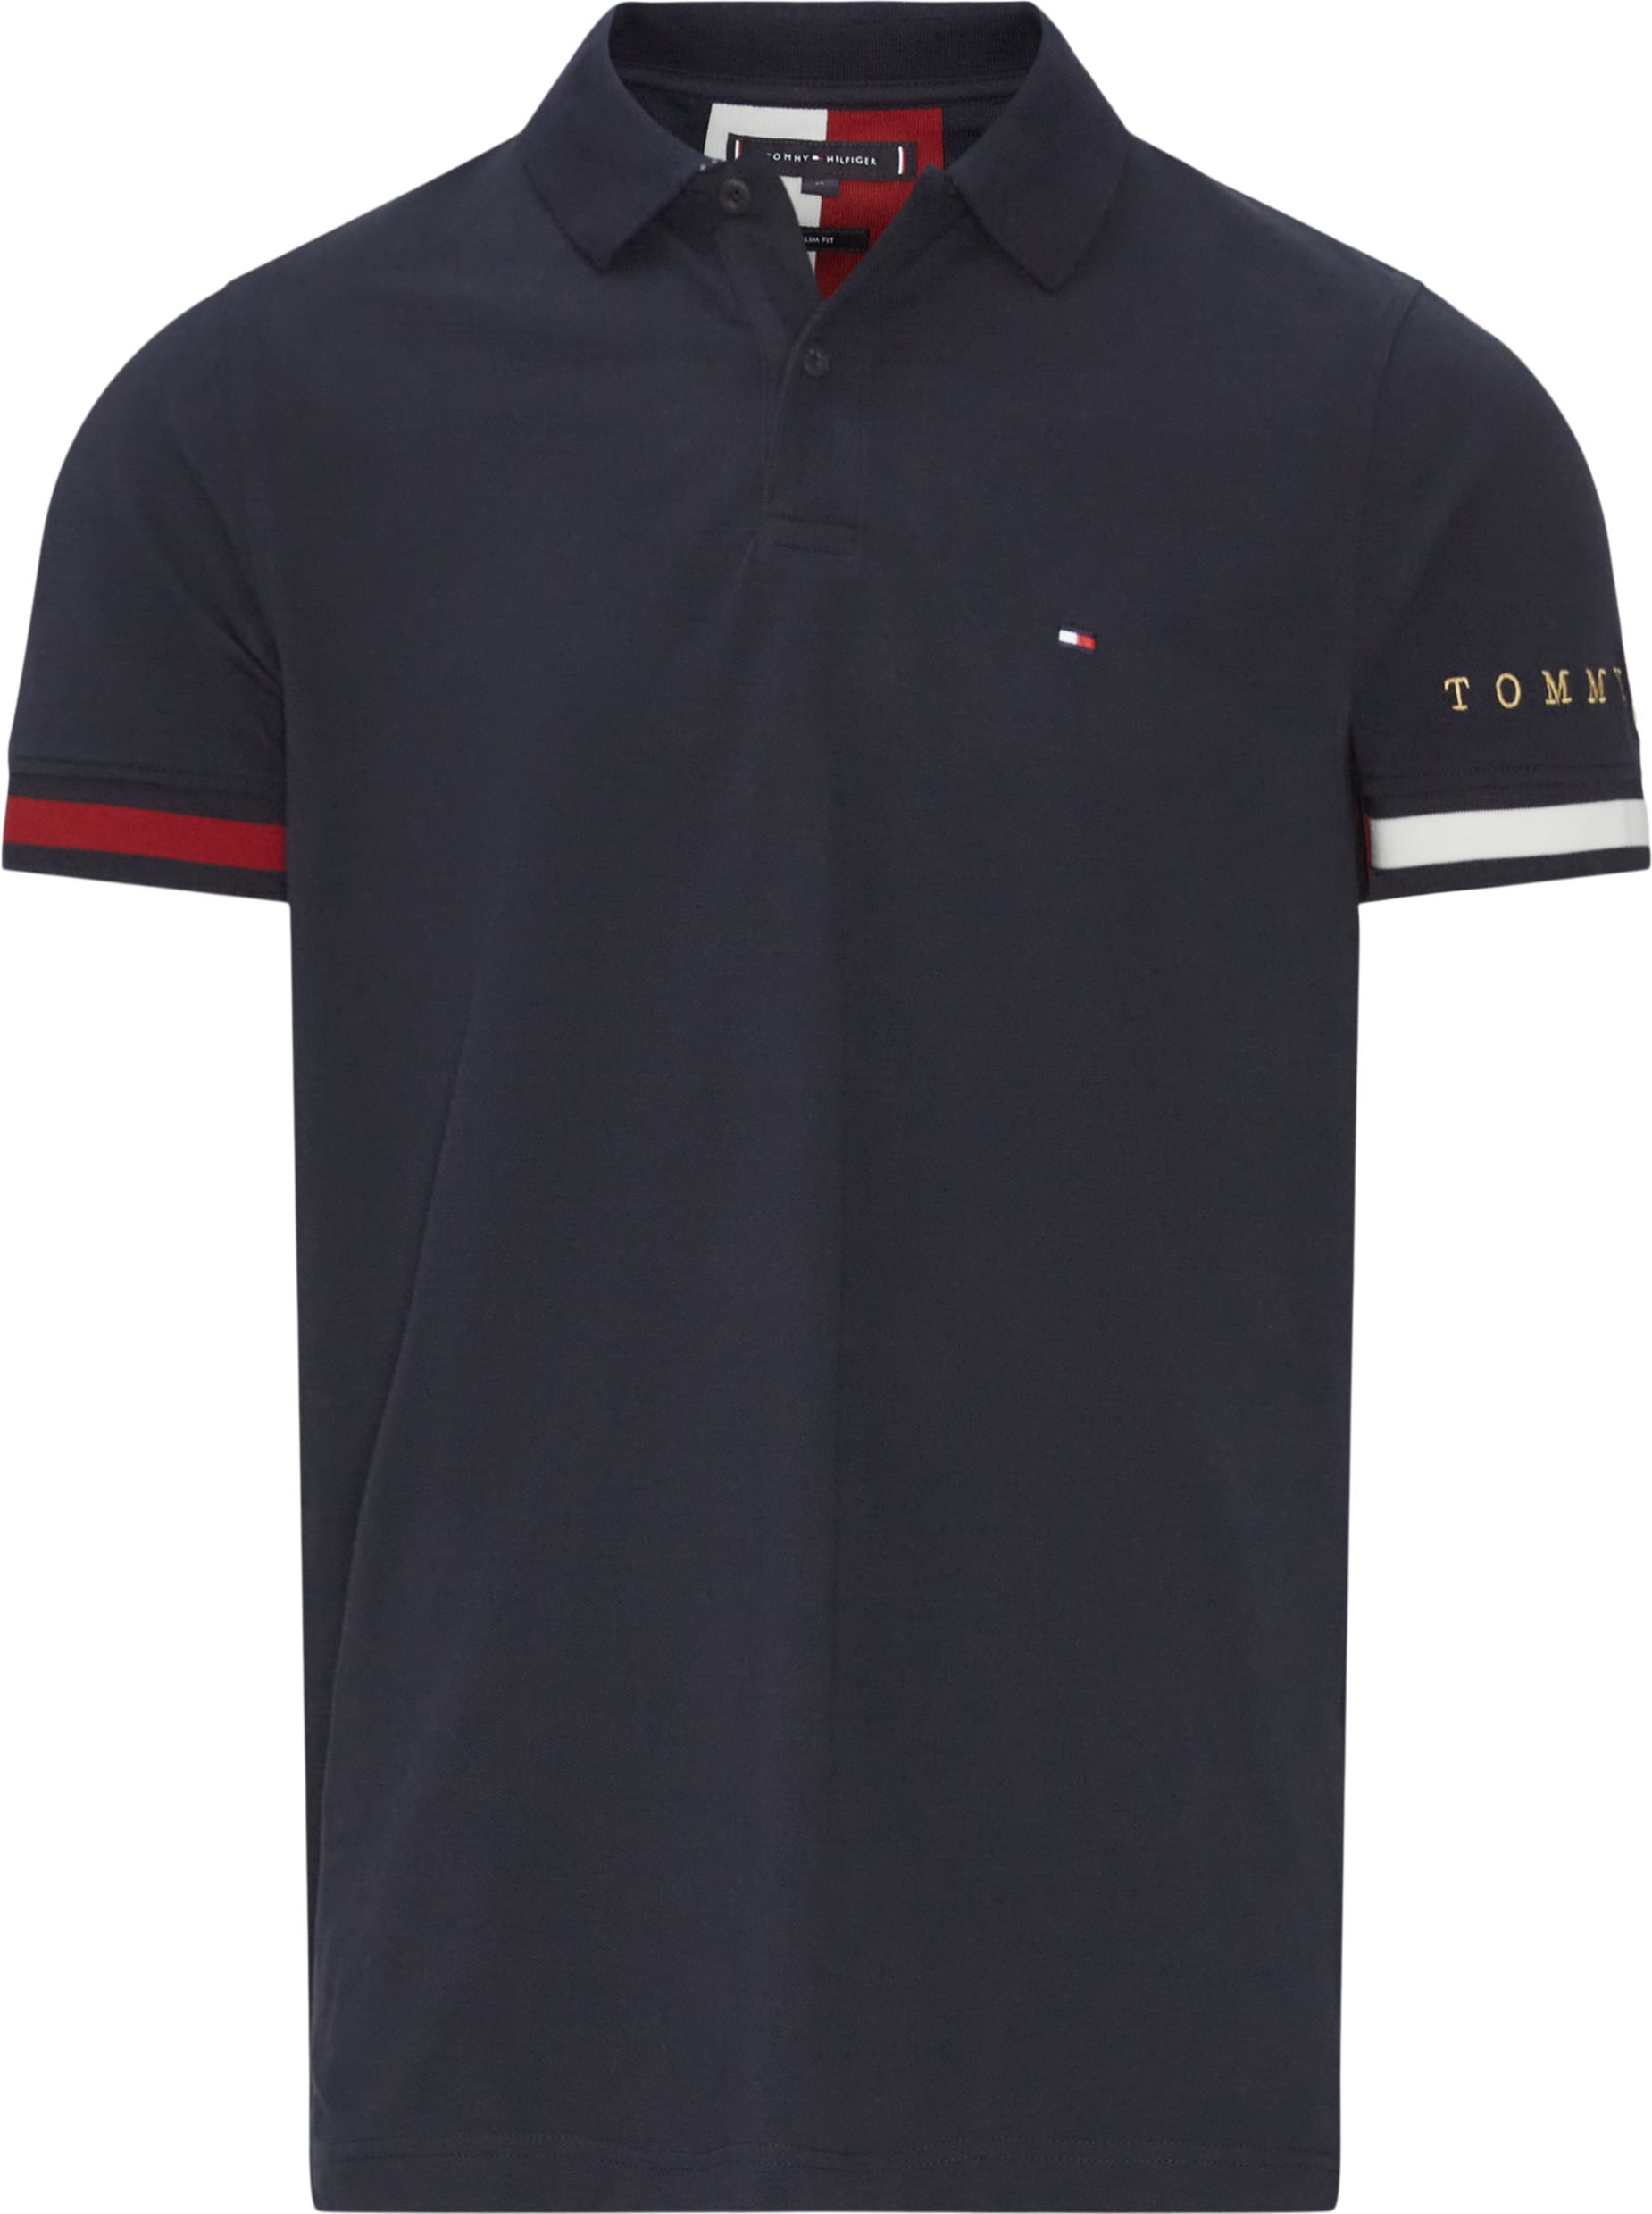 Tommy Hilfiger Signature Flag embroidered-logo Polo Shirt - Farfetch